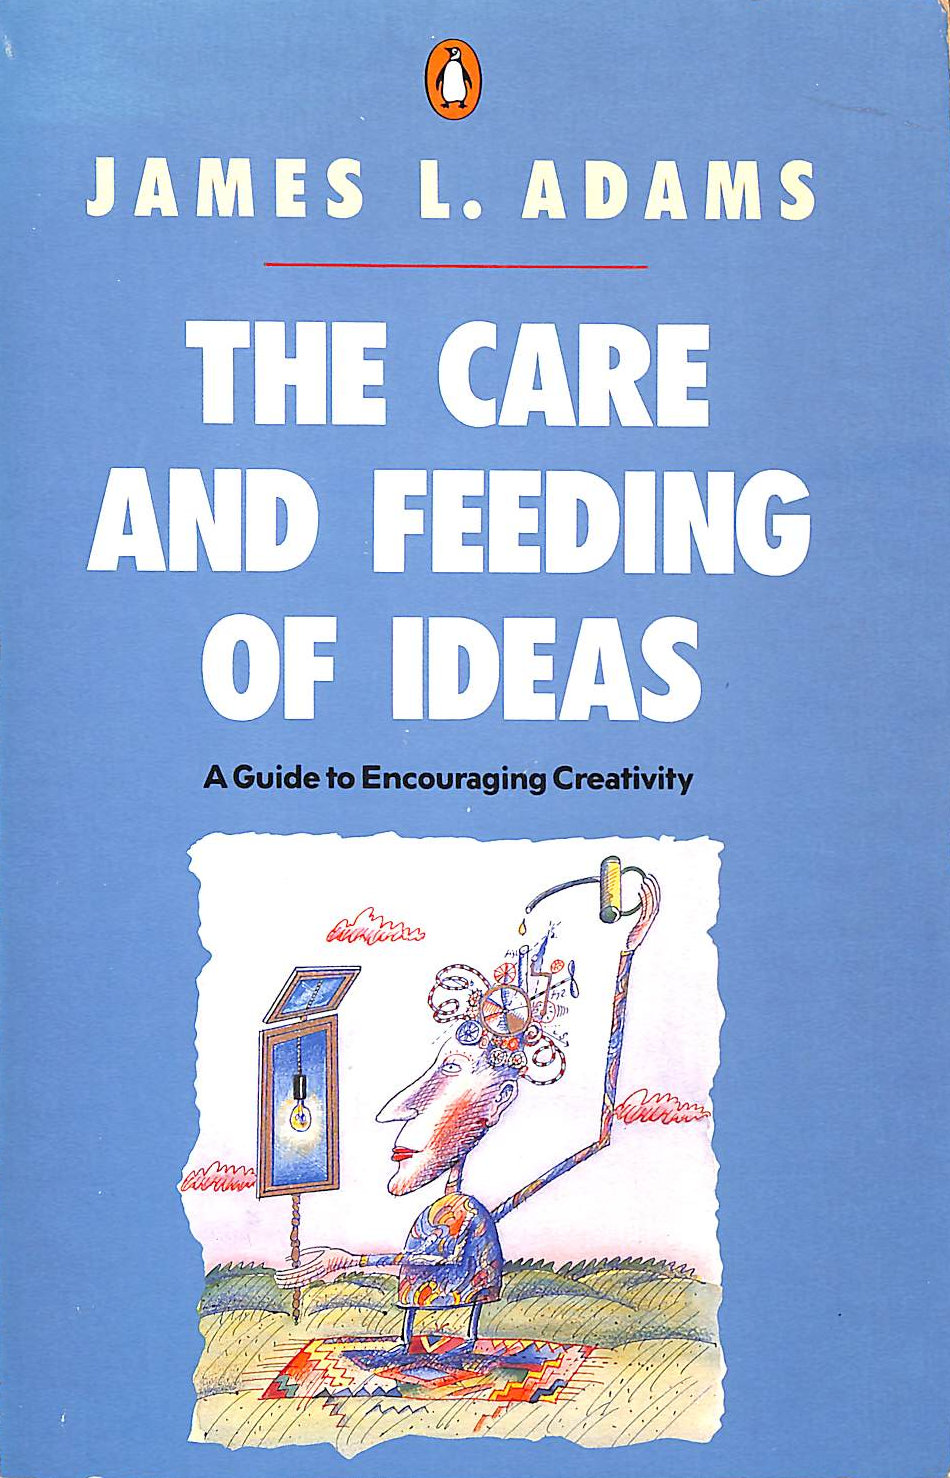 ADAMS, JAMES L. - The Care and Feeding of Ideas: A Guide to Encouraging Creativity (Penguin non-fiction)